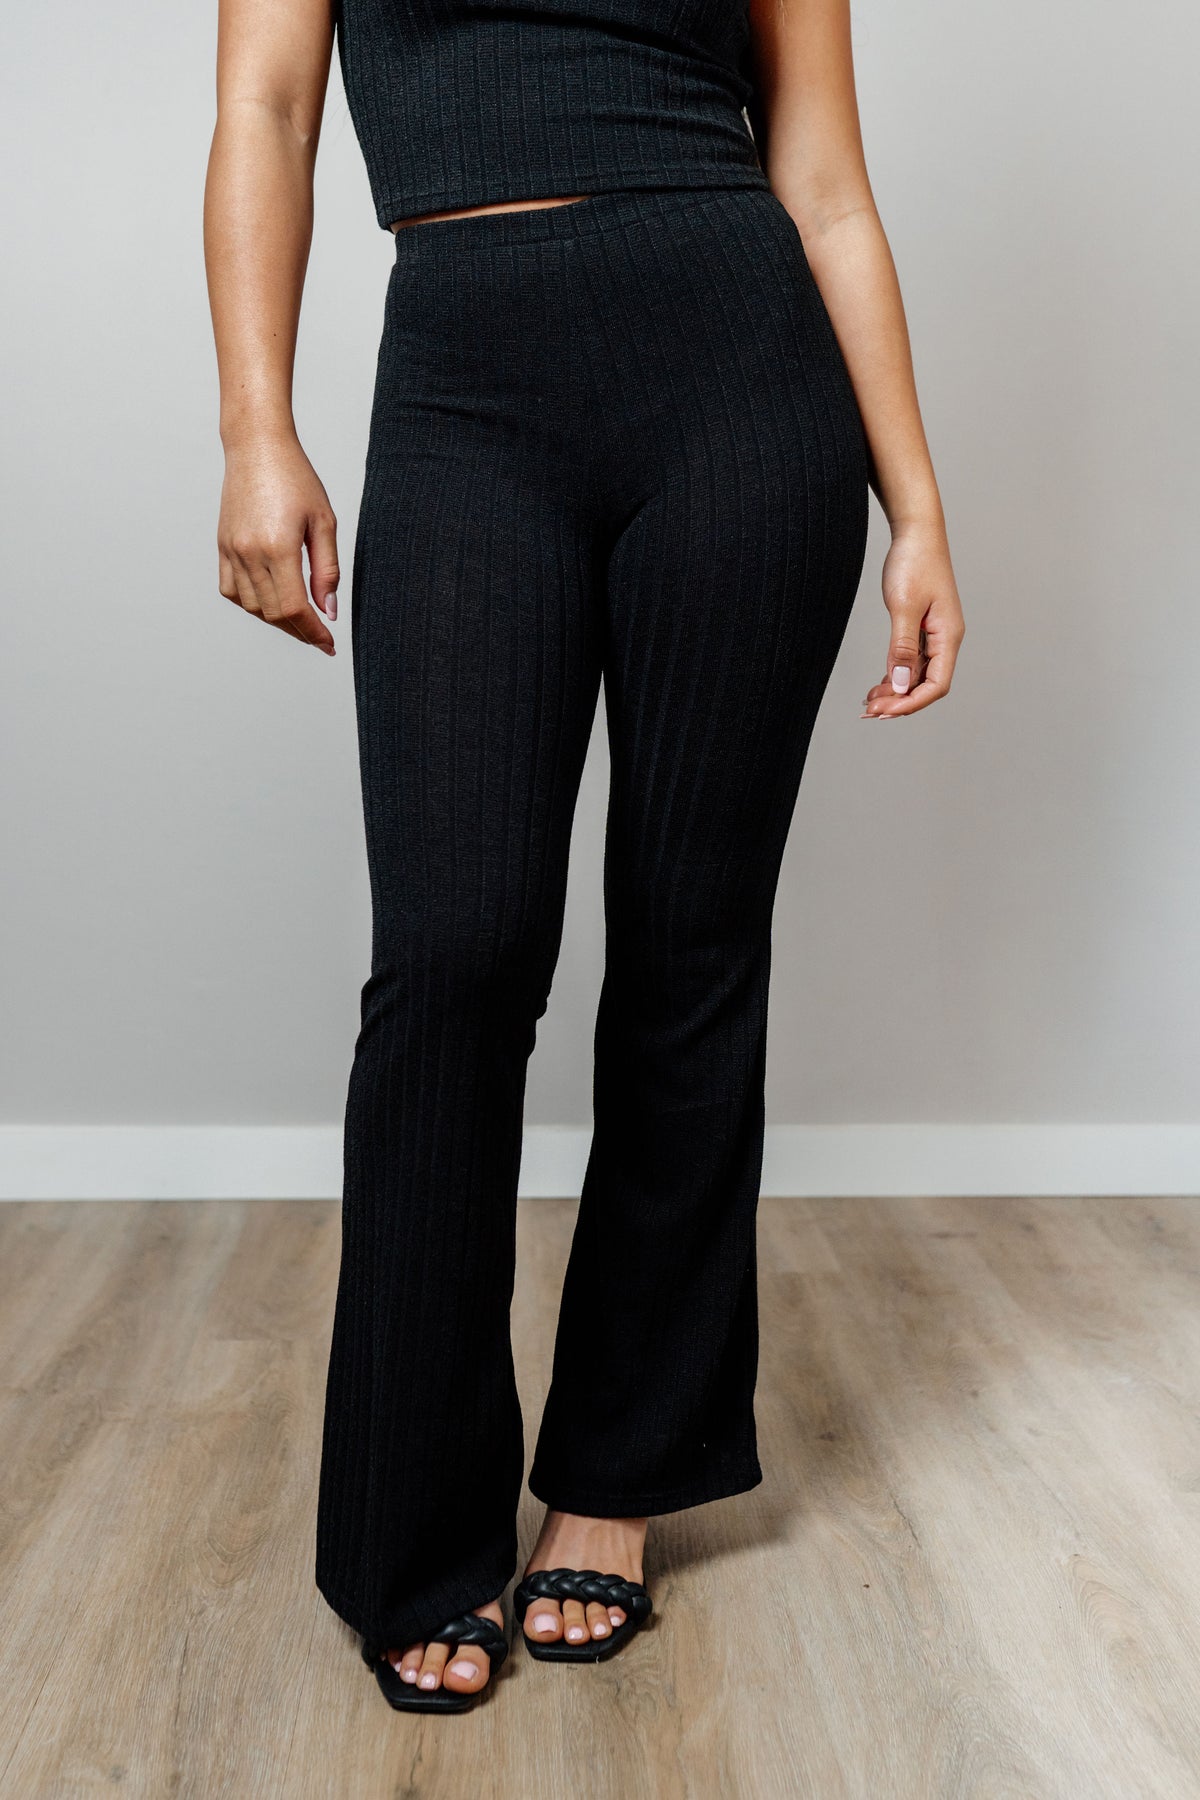 Euphoria Ribbed Flare Lounge Pants – For Elyse